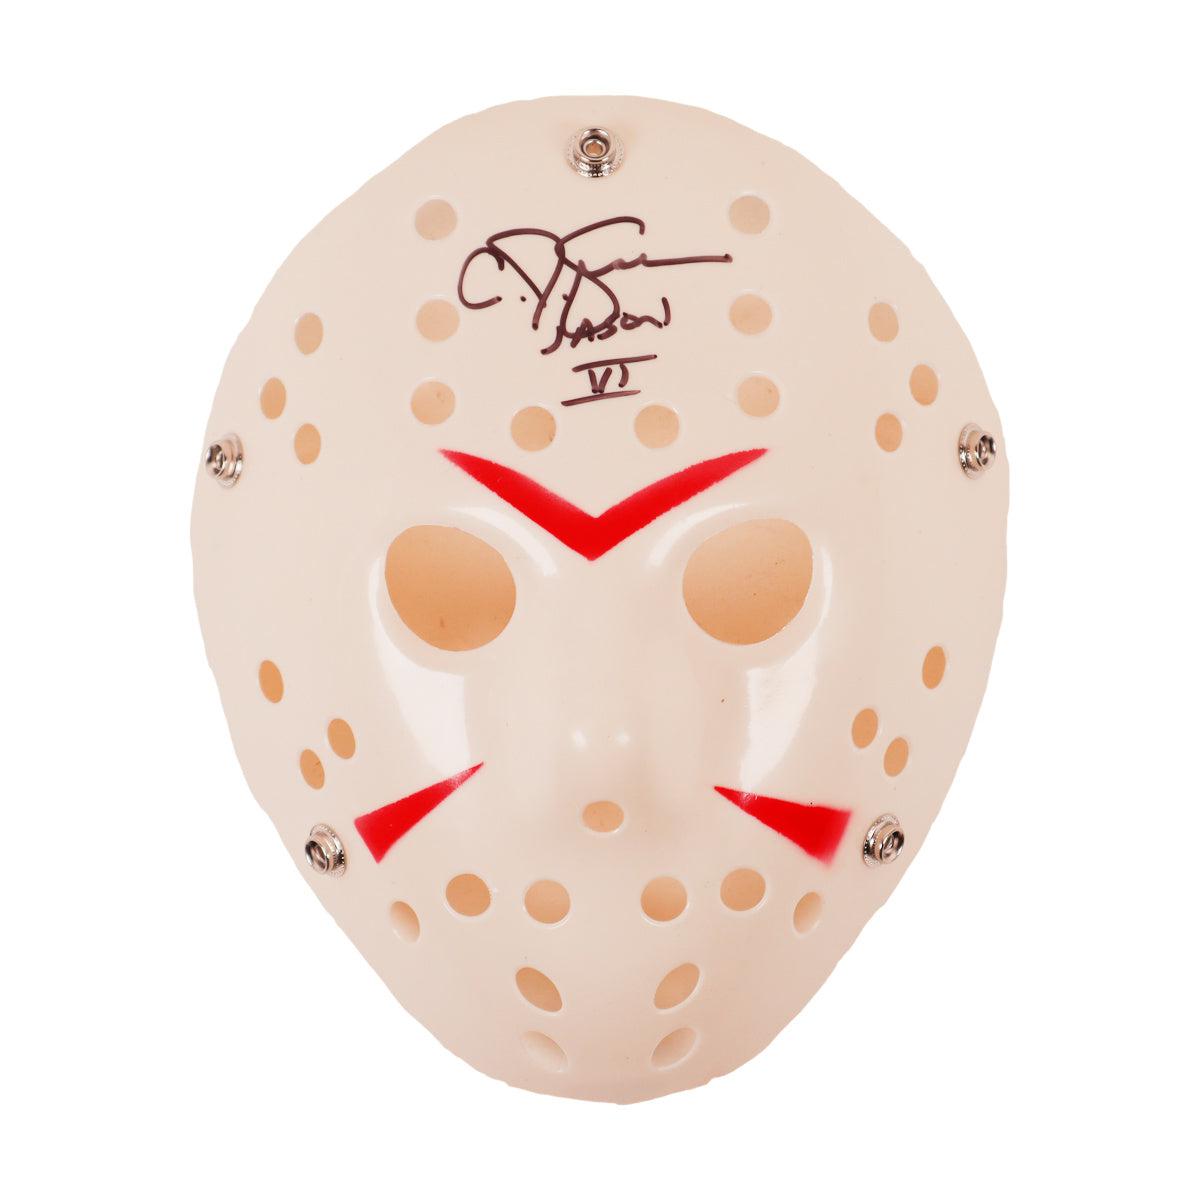 CJ Graham Autographed Jason Voorhees Friday the 13th Mask Signed JSA COA